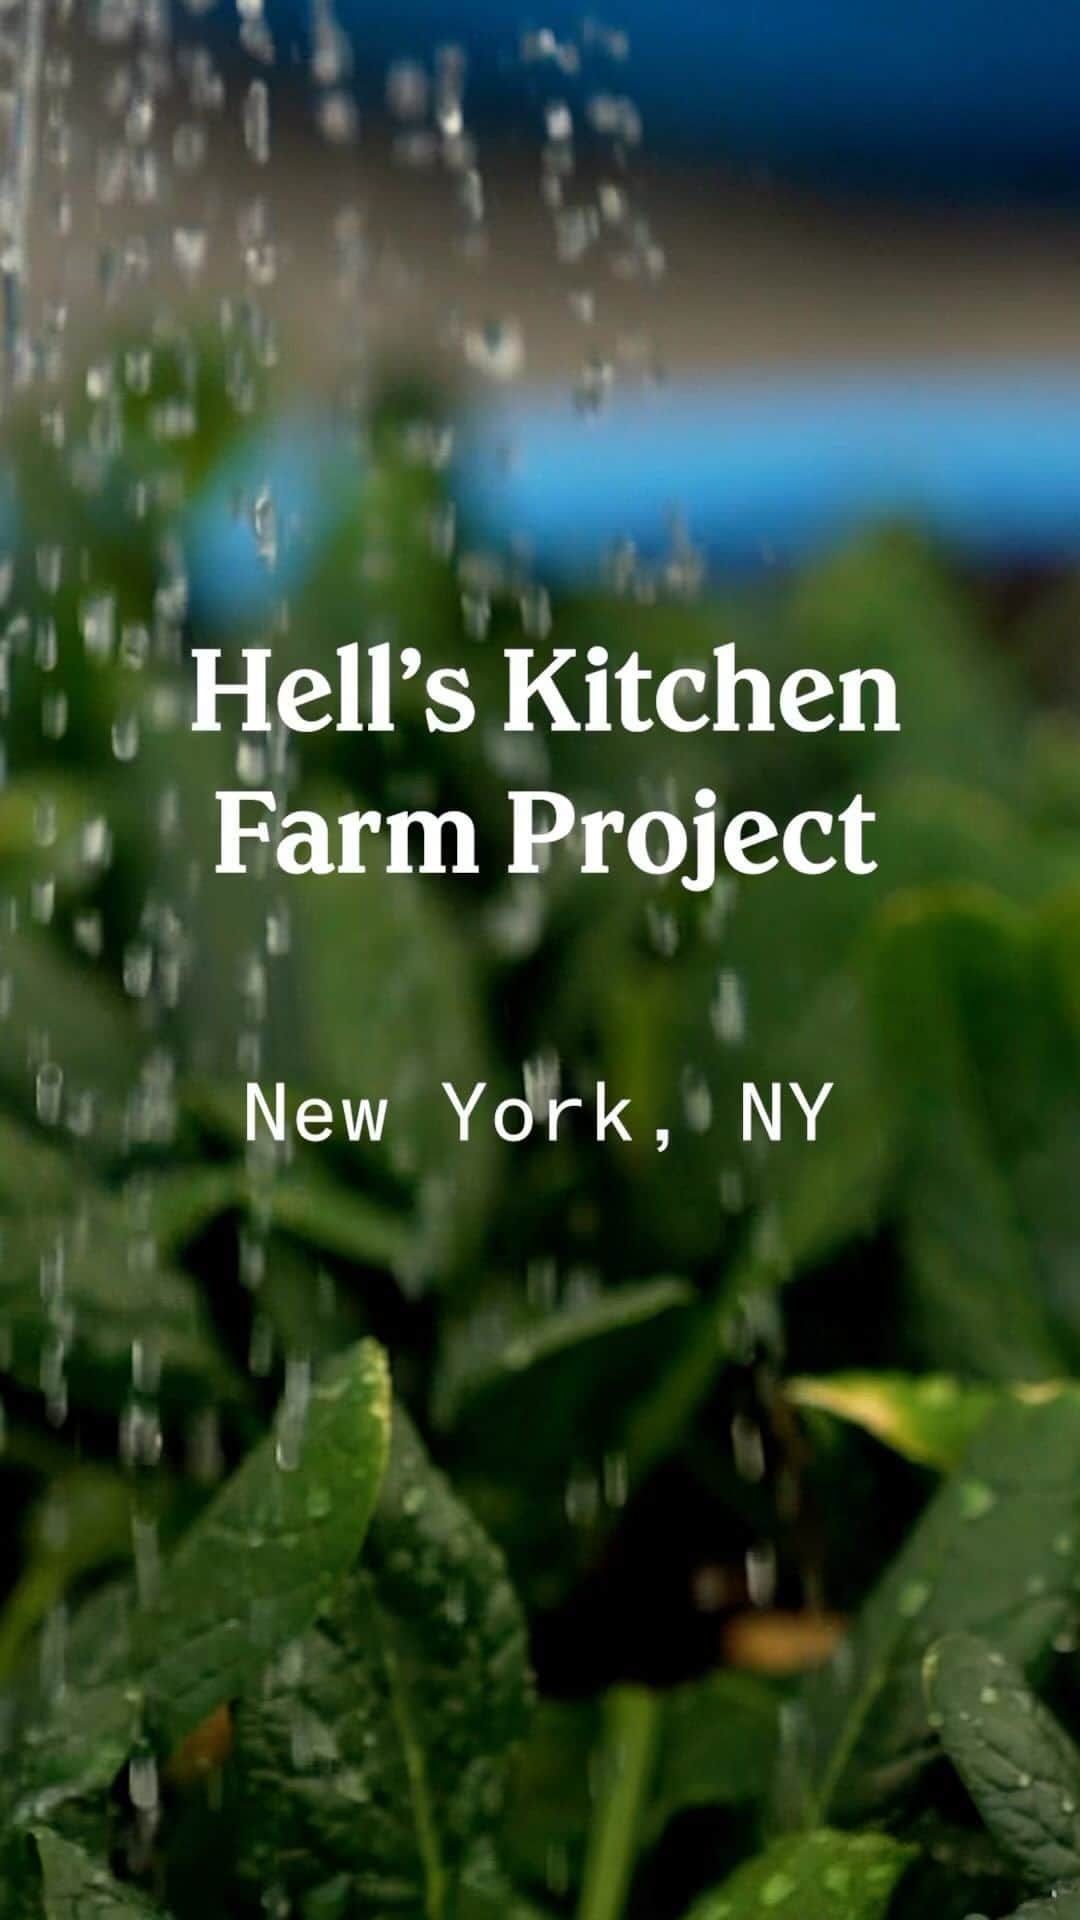 Chobaniのインスタグラム：「The Hell’s Kitchen Farm Project is on a mission to foster a more food secure community. The harvest from the rooftop farm supplies a food pantry at street level with almost 500 pounds of fresh produce each season. Tiffany Triplett Henkel, a founding member of the Hell’s Kitchen Farm Project, has worked with a dedicated group of volunteers to provide access to healthy, nutritious food for the 1,300 people who utilize the program each year for the last 14 years. Visit @hkfarmproject to learn more about how you can get involved and support their efforts to address food security in NYC’s Hell’s Kitchen neighborhood.」